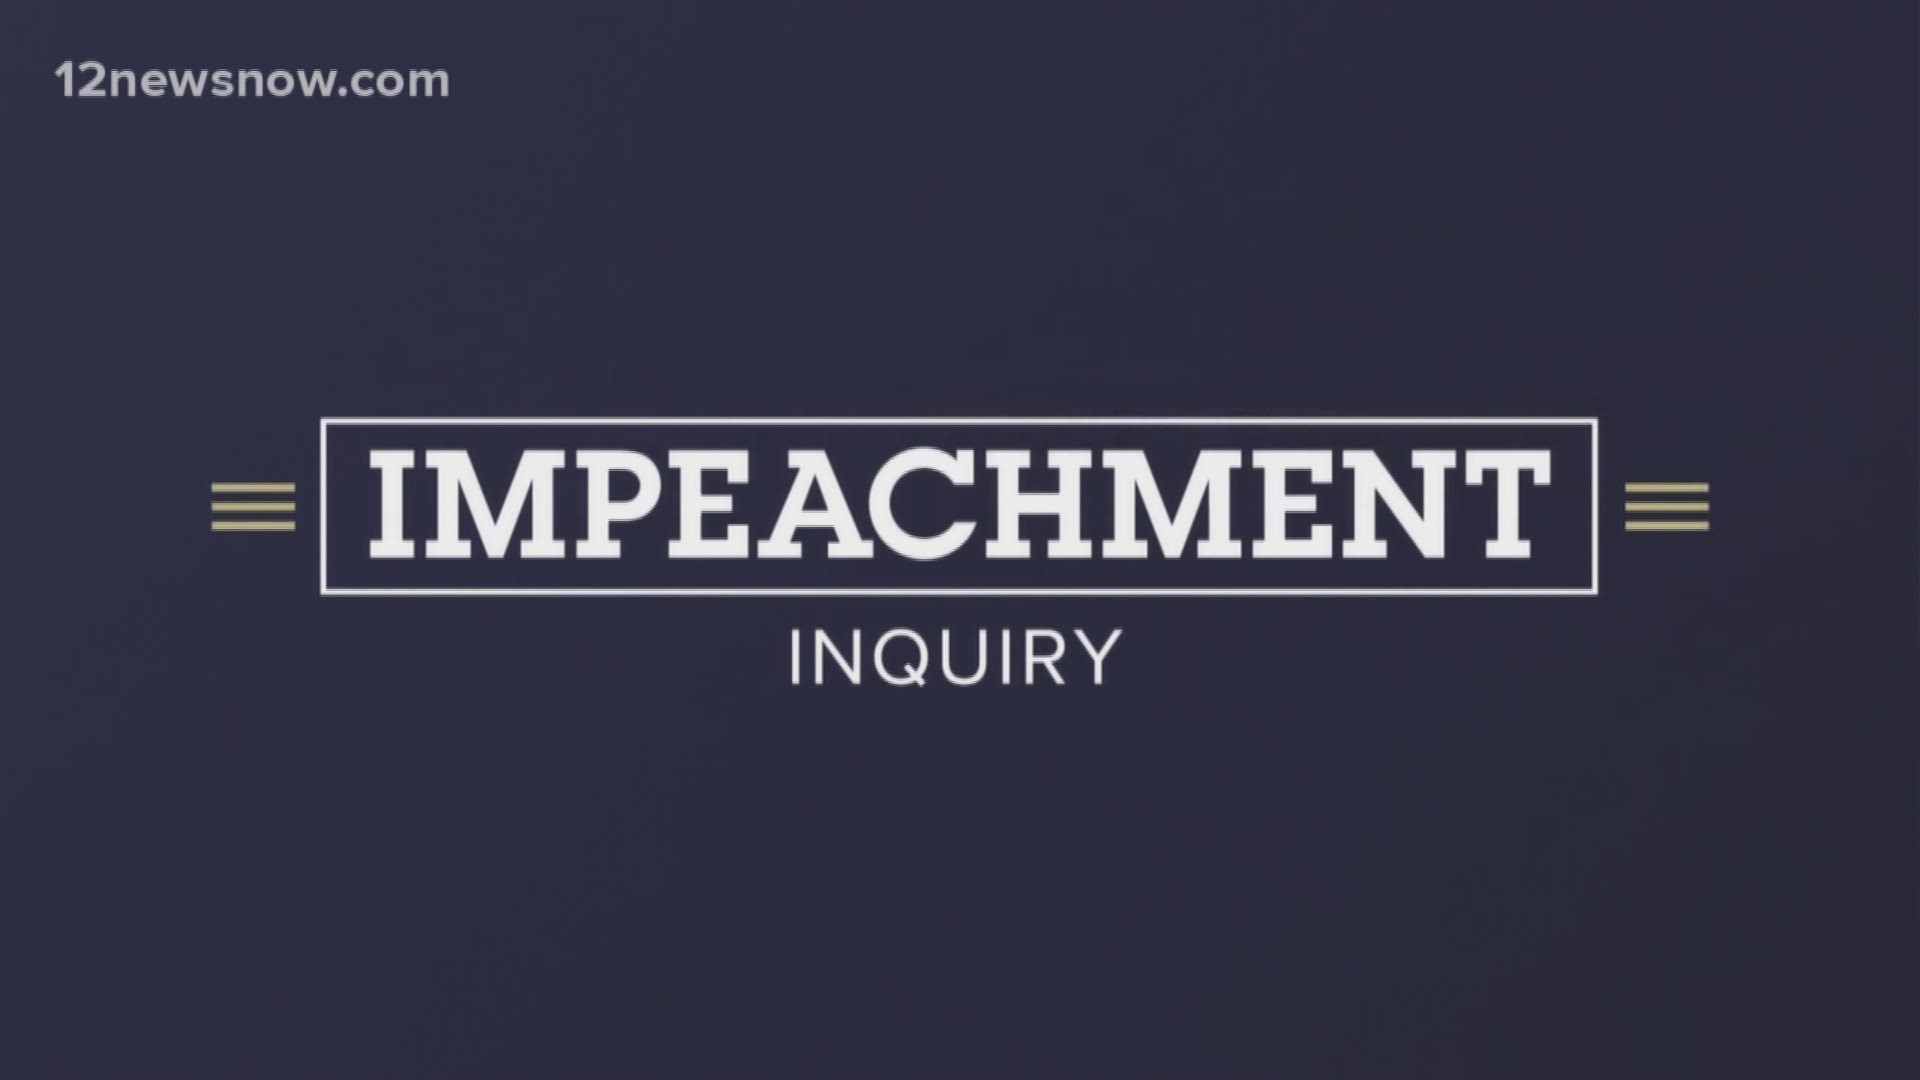 Two weeks of public impeachment inquiry hearings have wrapped up. The president has criticized the hearings from the starts. This week, nine witnesses testified.